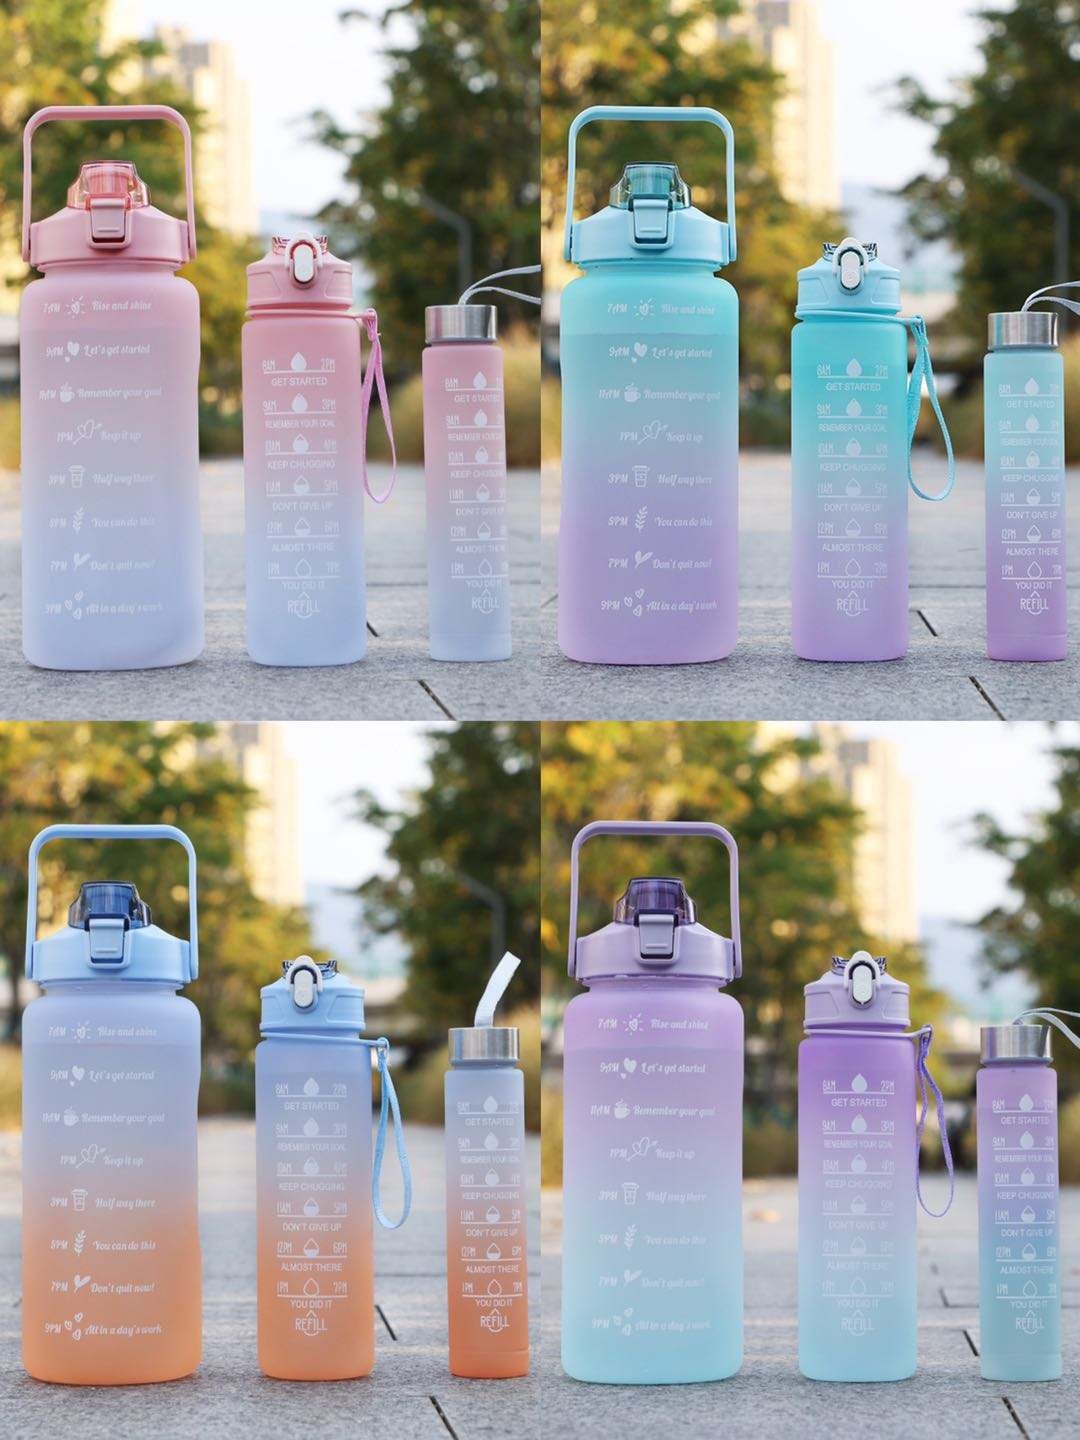 Gifubowa 2 Liter Gradient Color Plastic Water Bottles With Time